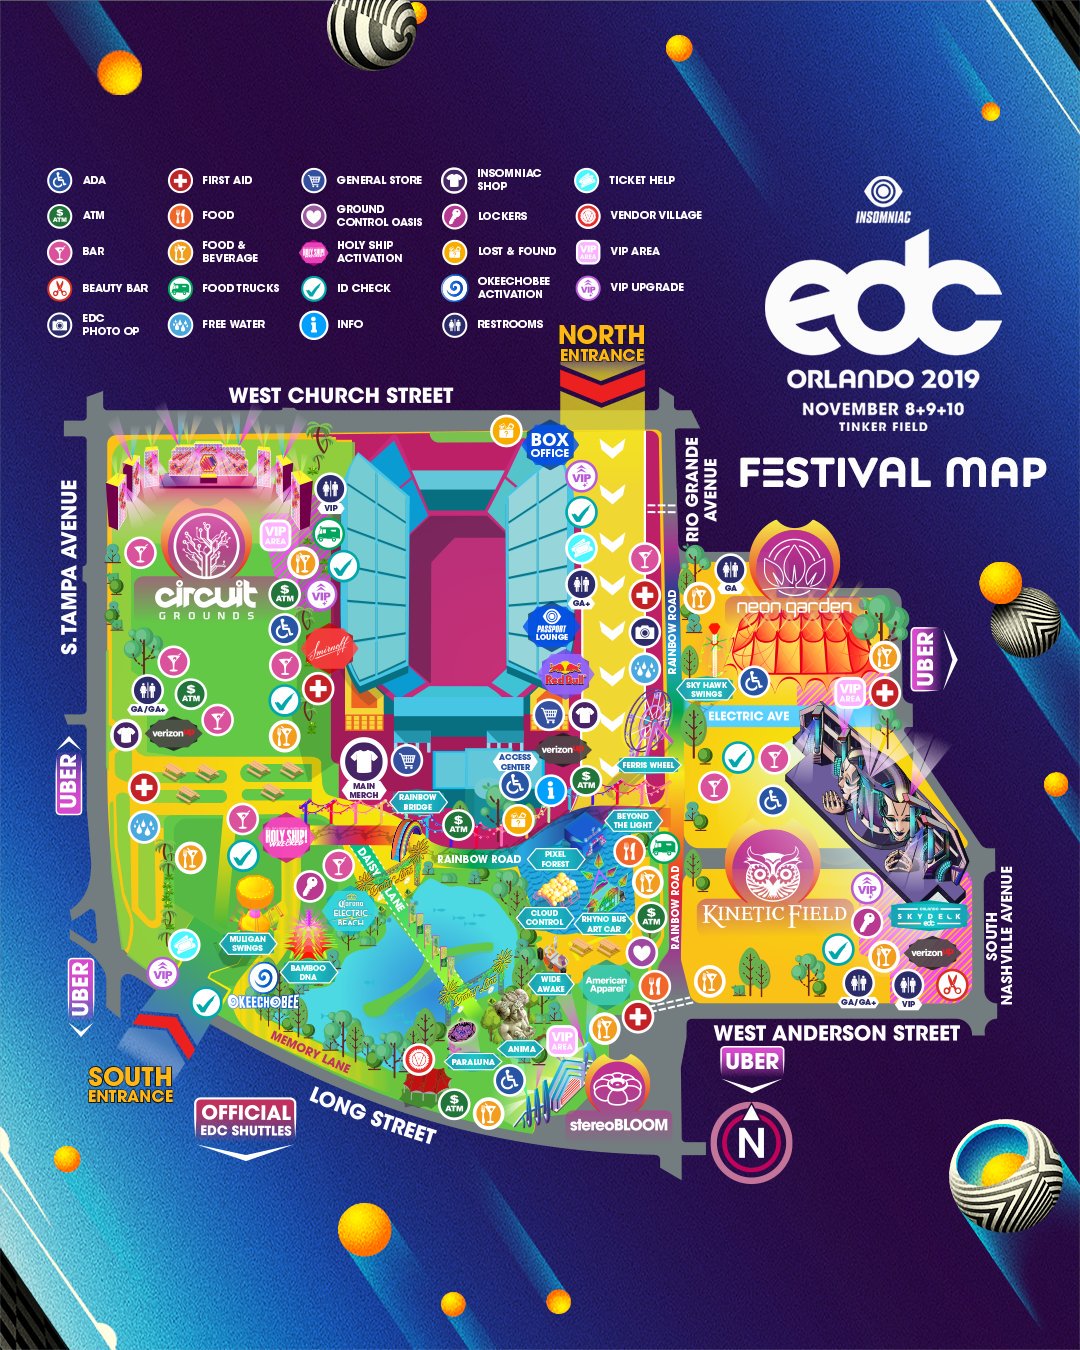 EDC stage being built orlando